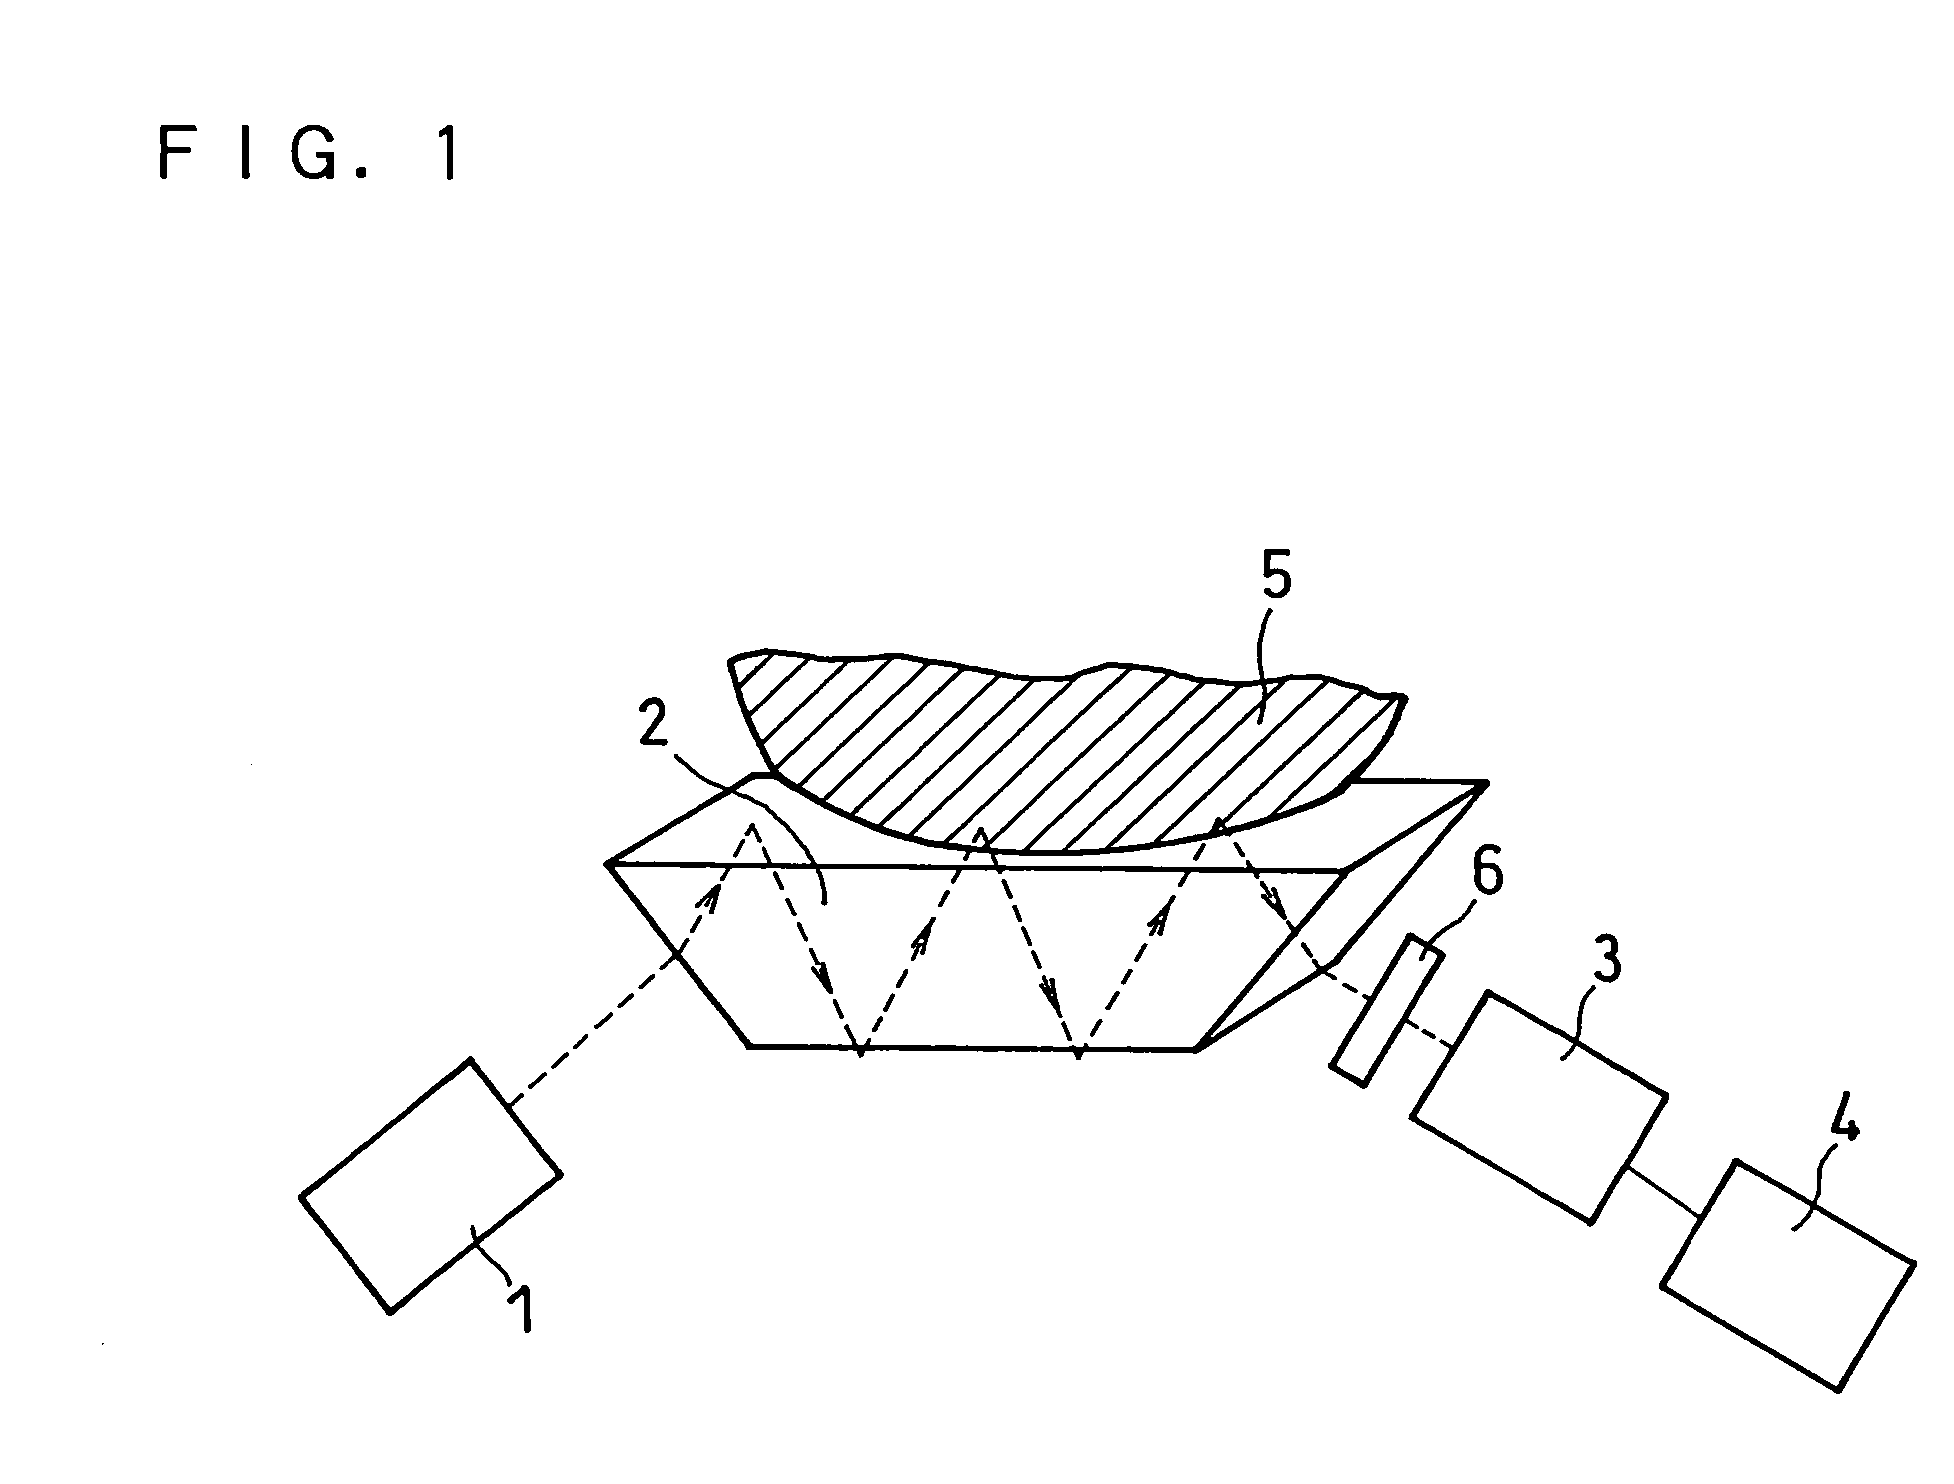 Method and device for measuring concentration of specific component